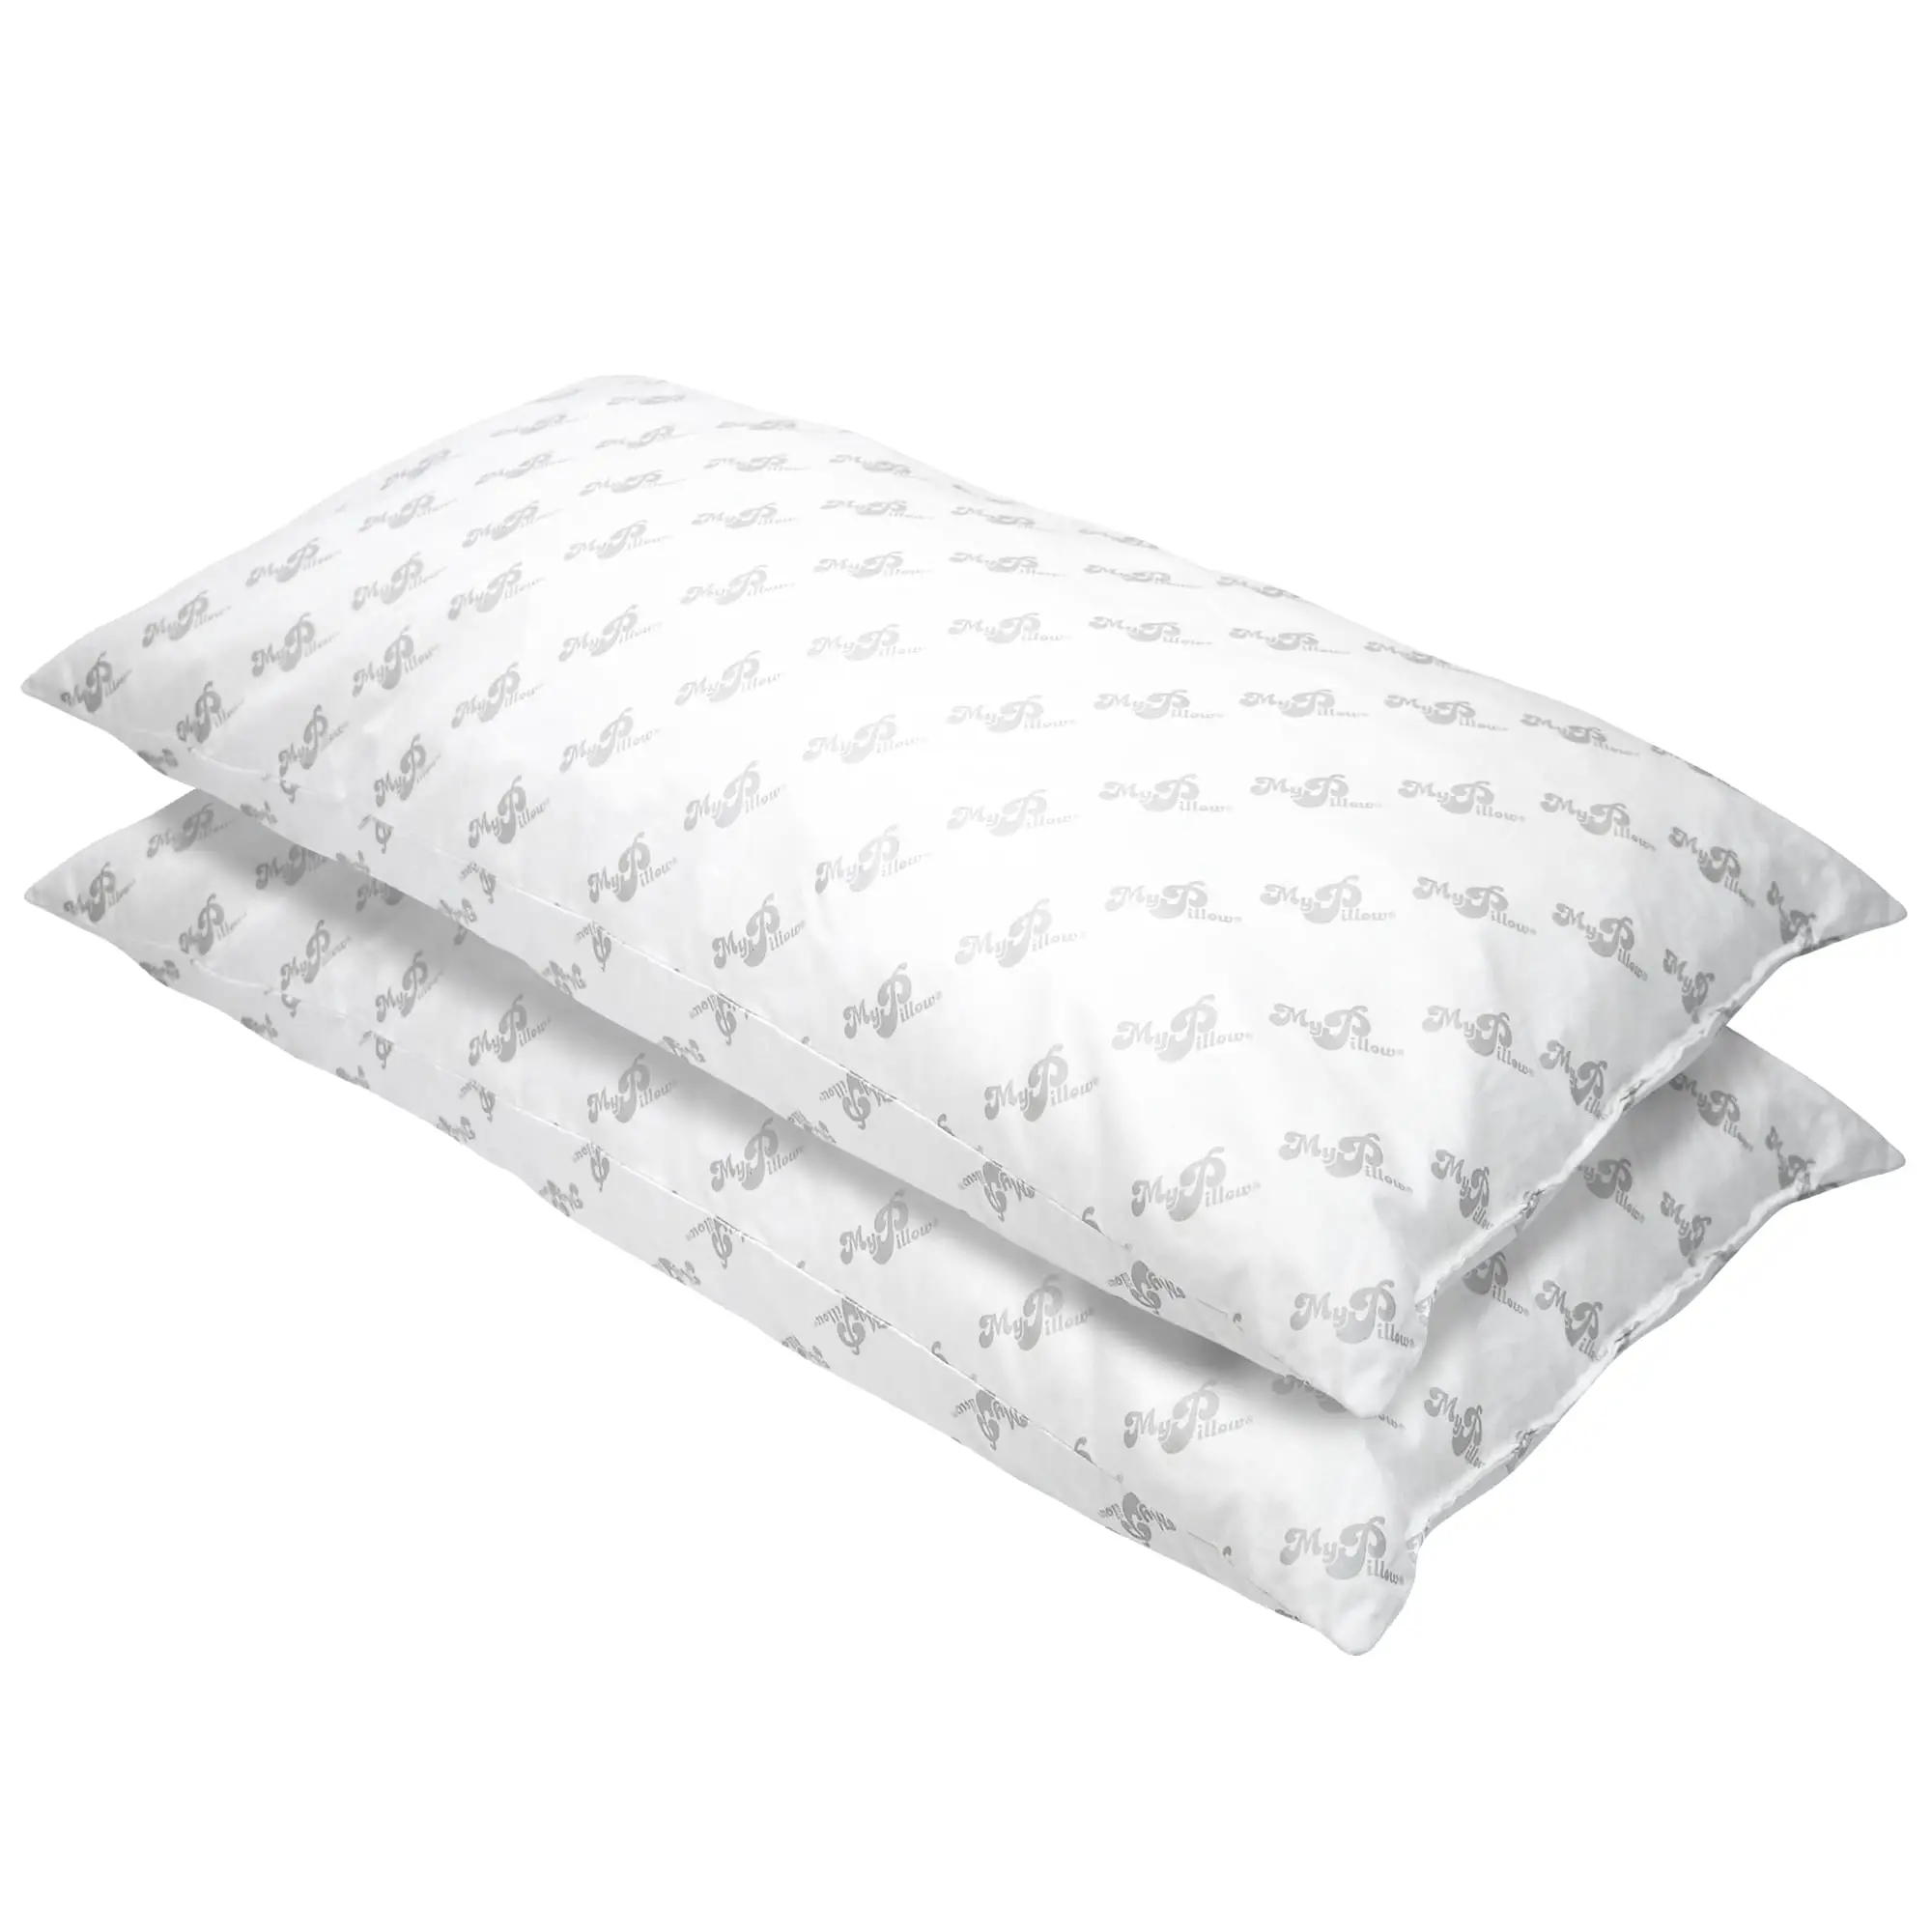 MyPillow Classic, King Size and Firm Support, Set of 2 Pillows ...